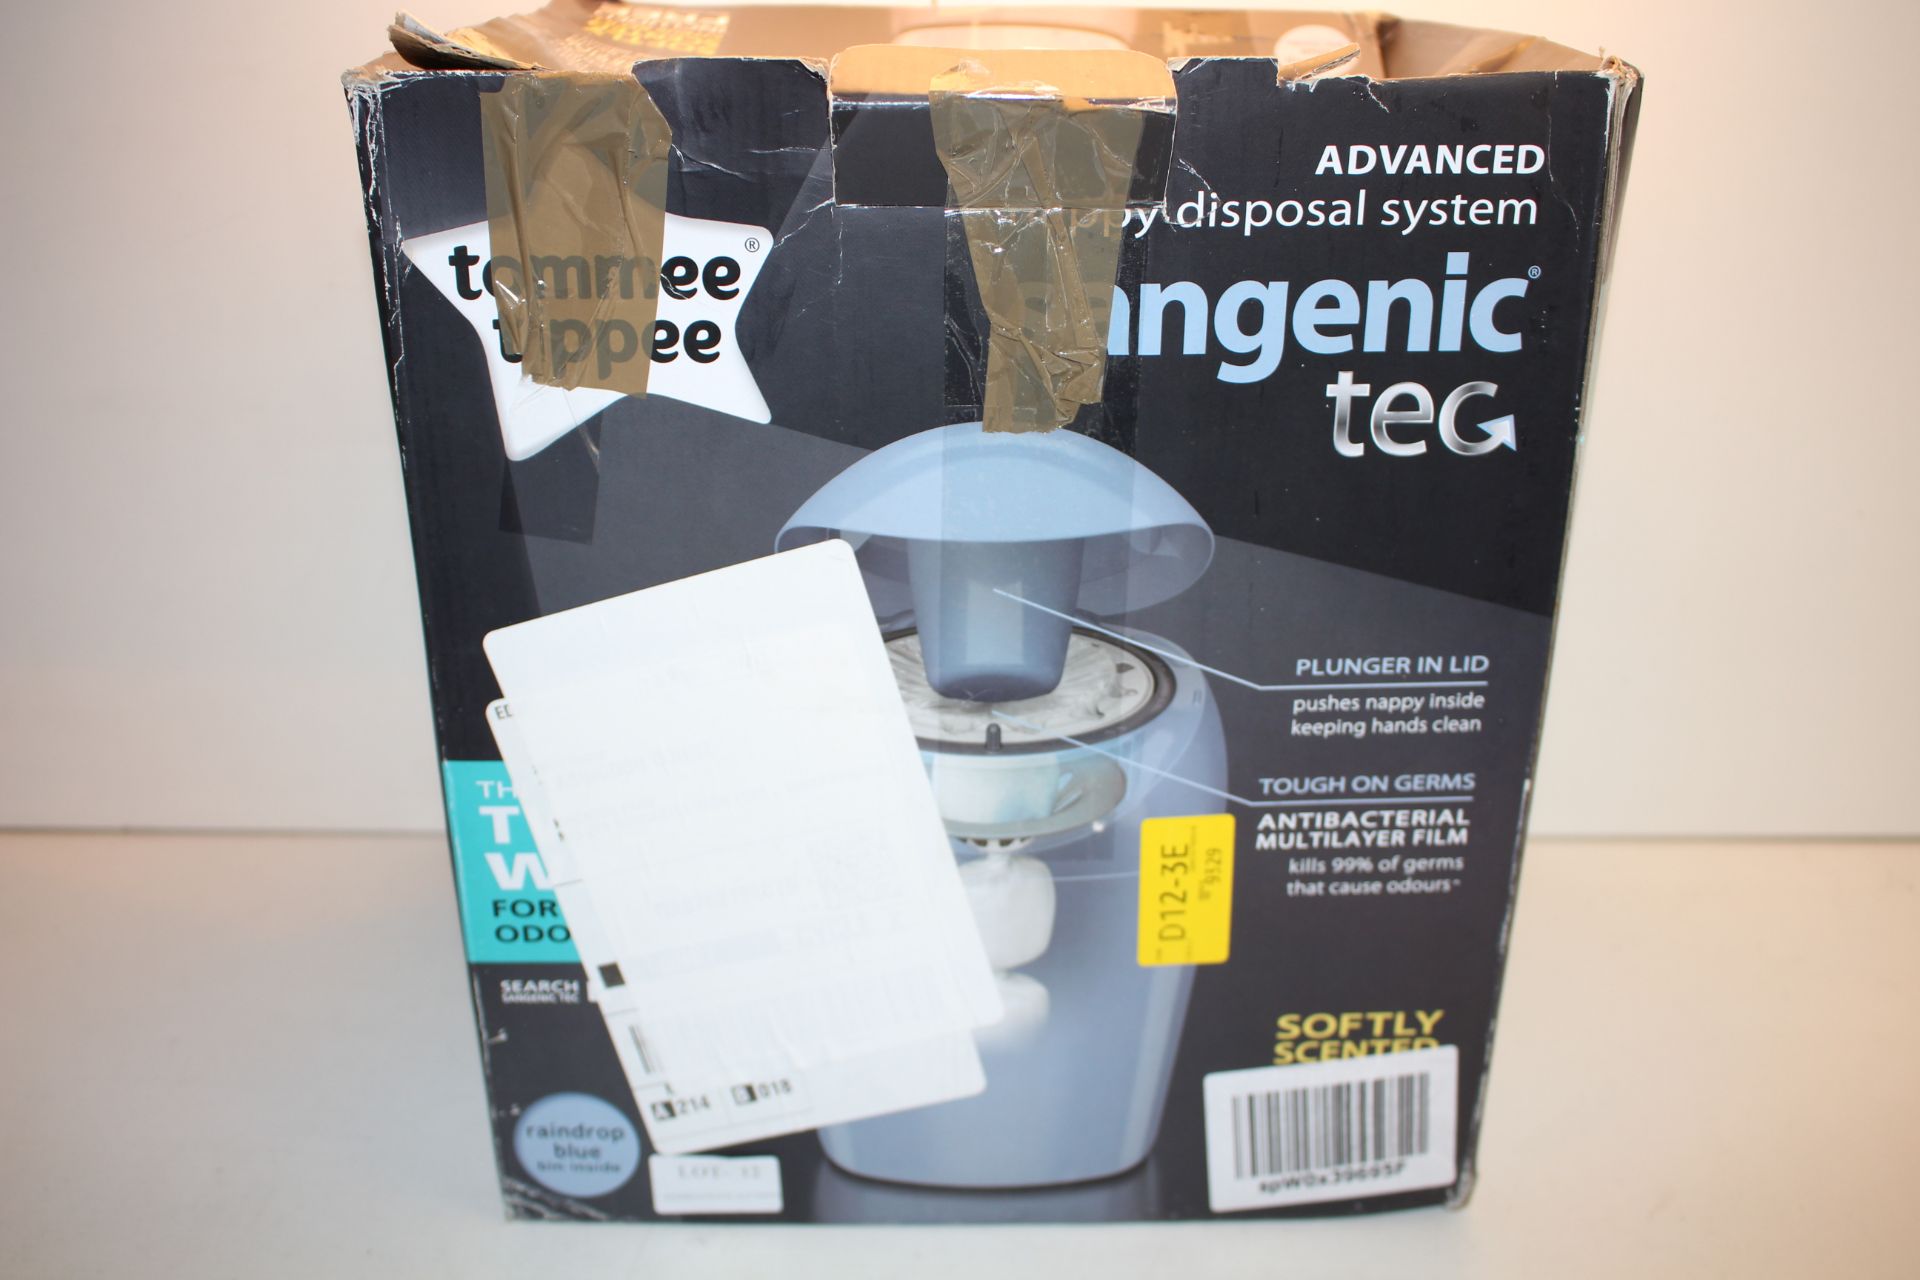 BOXED TOMMEE TIPPEE ADVANCED NAPPY DISPOSAL SYSTEM SANGENIC TECH RRP £29.99Condition ReportAppraisal